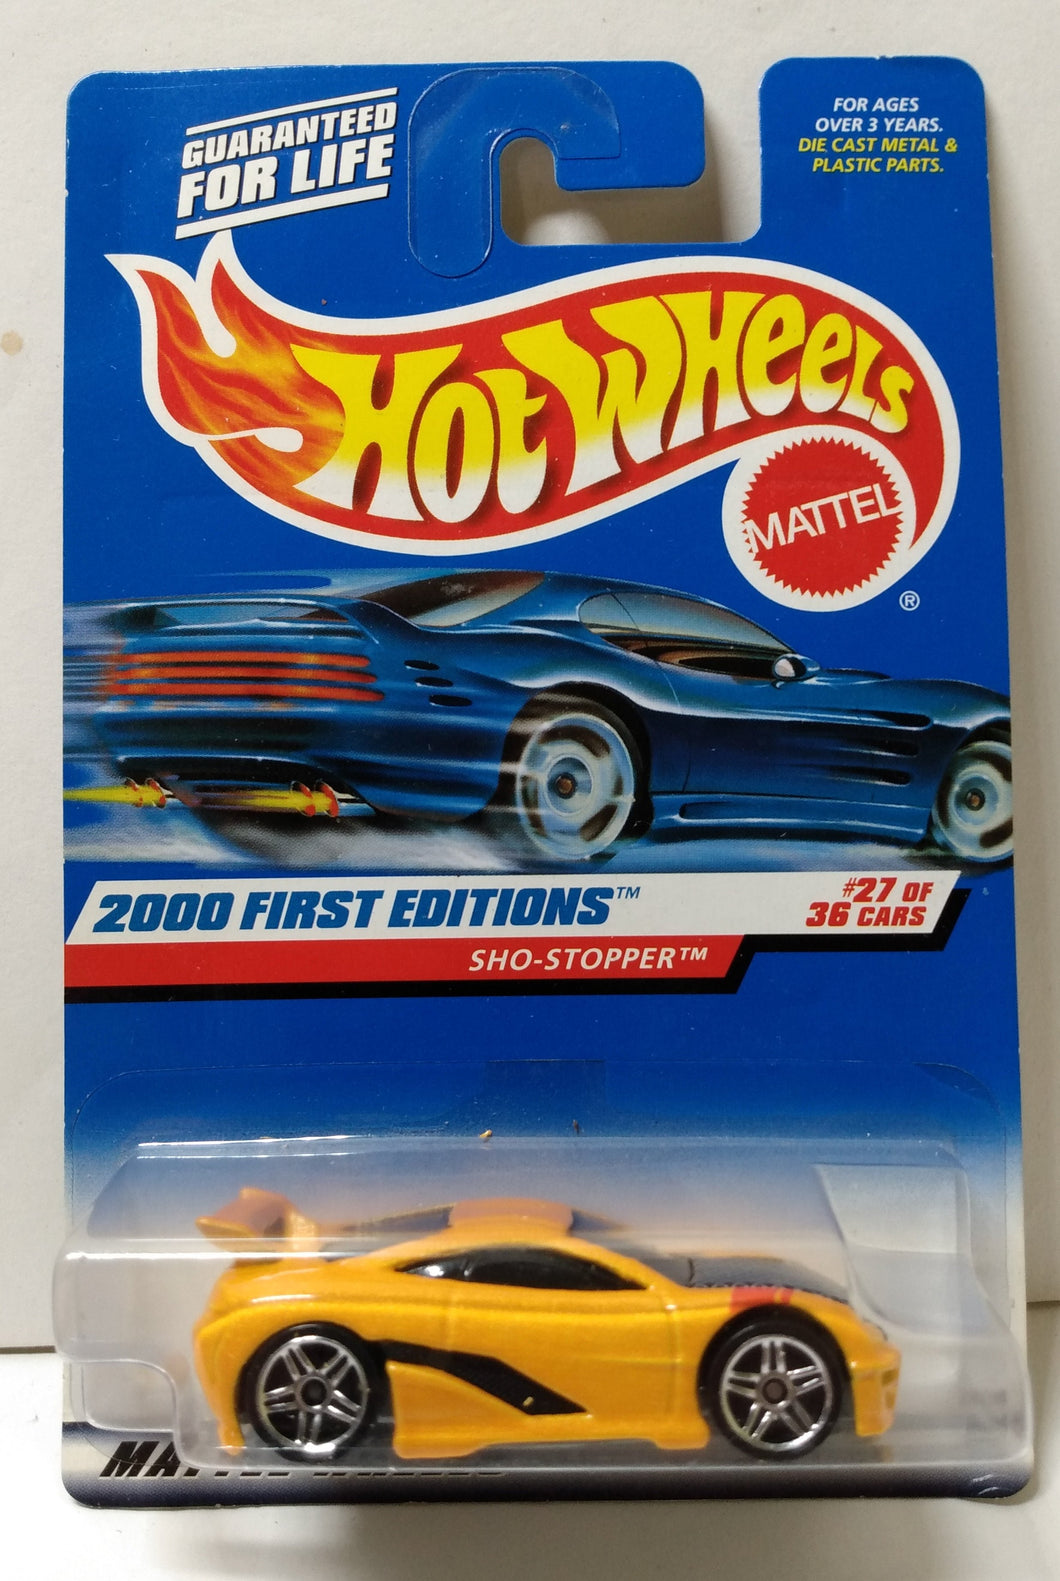 Hot Wheels 2000 First Editions Sho-stopper Concept Car #087 pr5 - TulipStuff